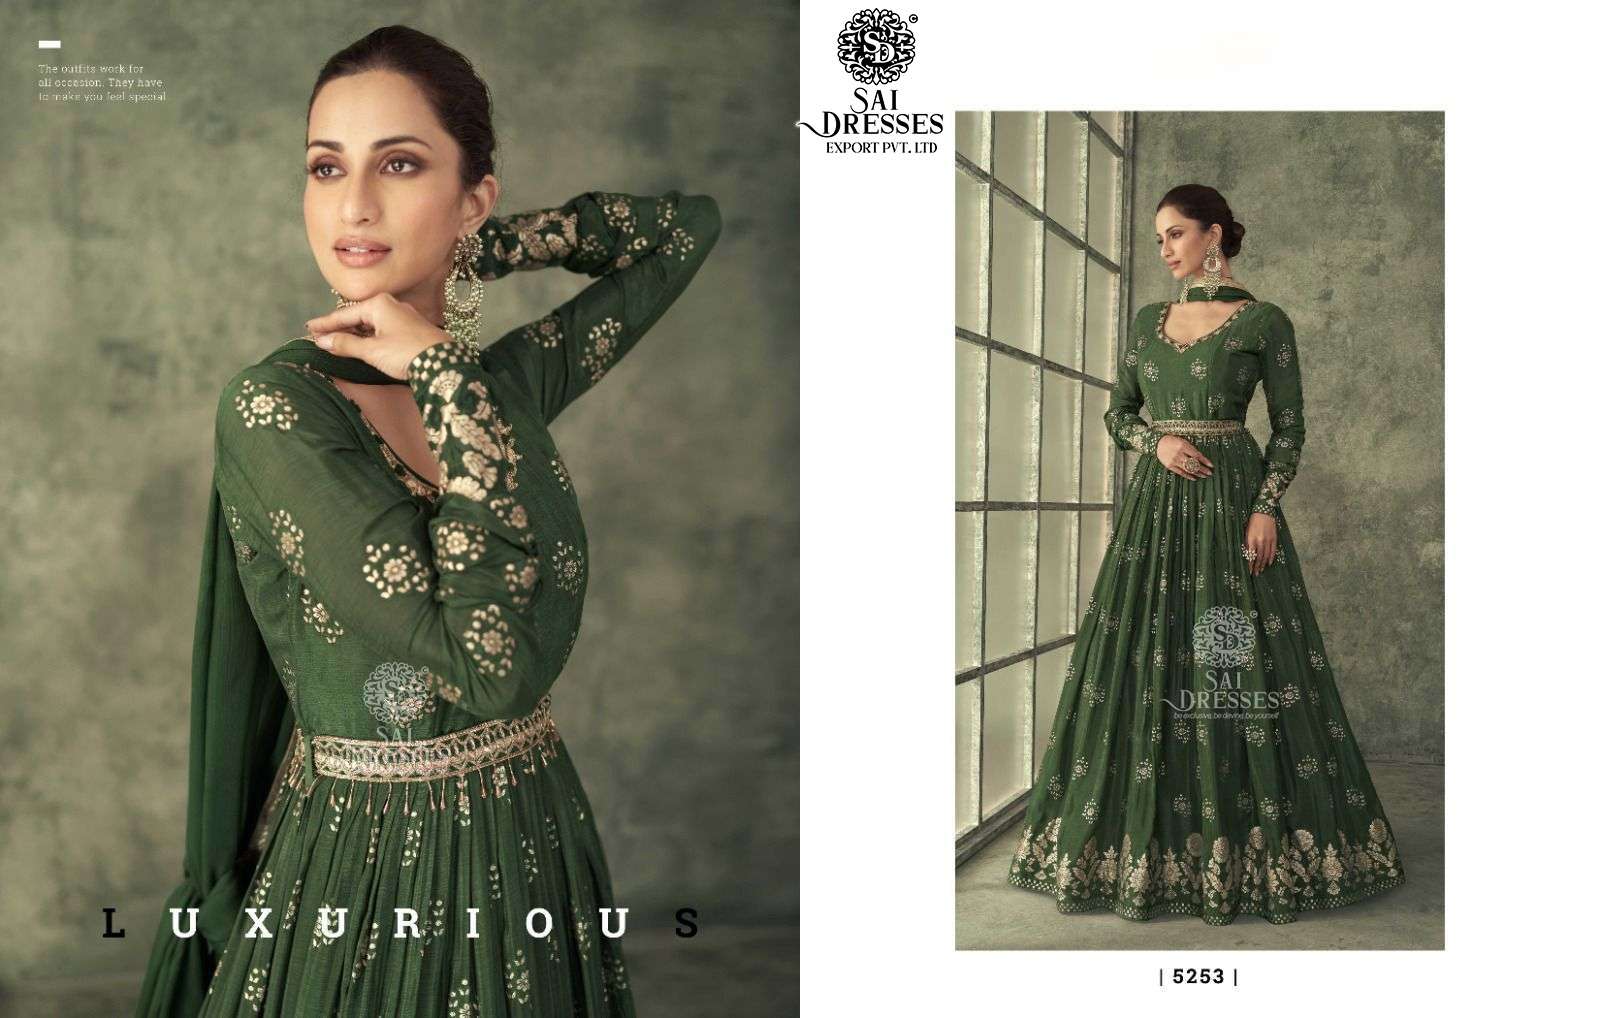 SAI DRESSES PRESENT SHINE READYMADE FESTIVE WEAR DESIGNER LONG GOWN WITH DUPATTA IN WHOLESALE RATE IN SURAT